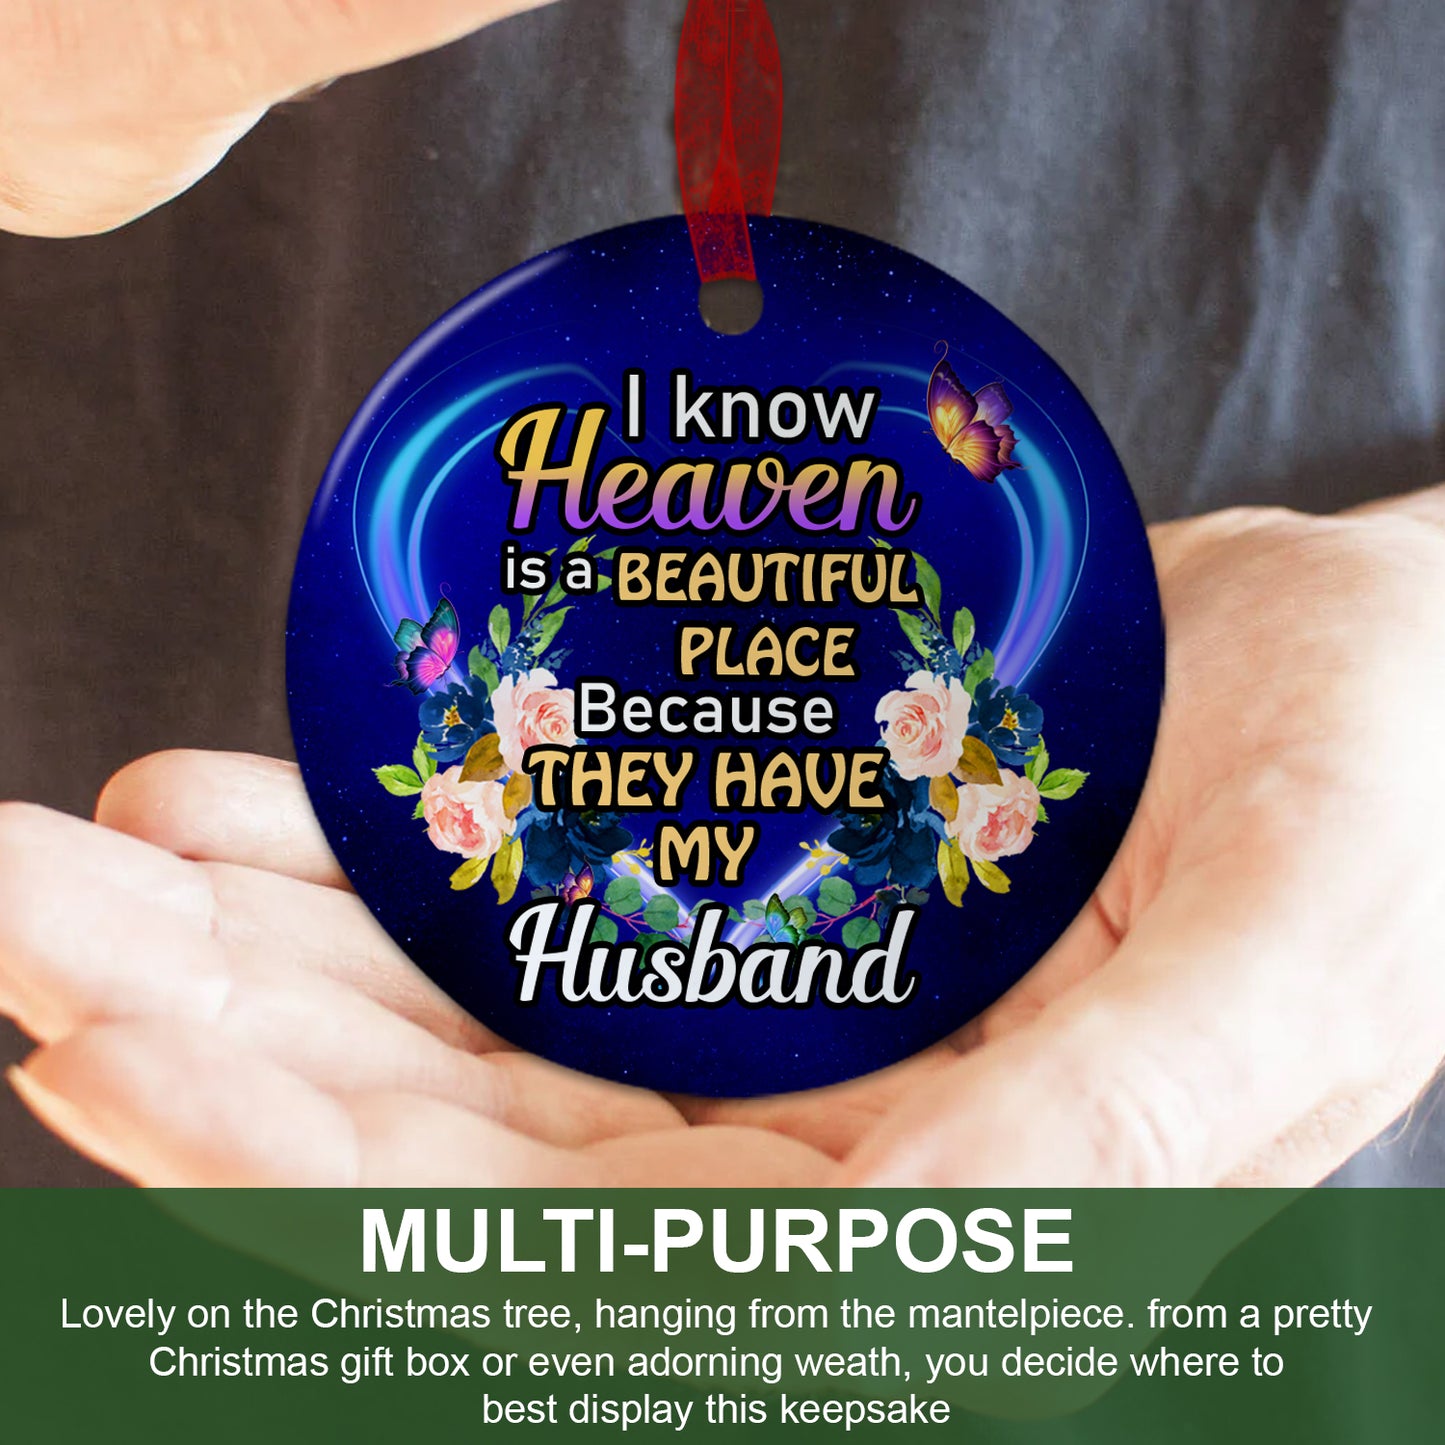 Husband Memorial Ornament I Know Heaven Is A Beautiful Place Because They Have My Husband Ornament Sympathy Keepsake Gift For Loss Of Husband- Aluminum Metal Ornament